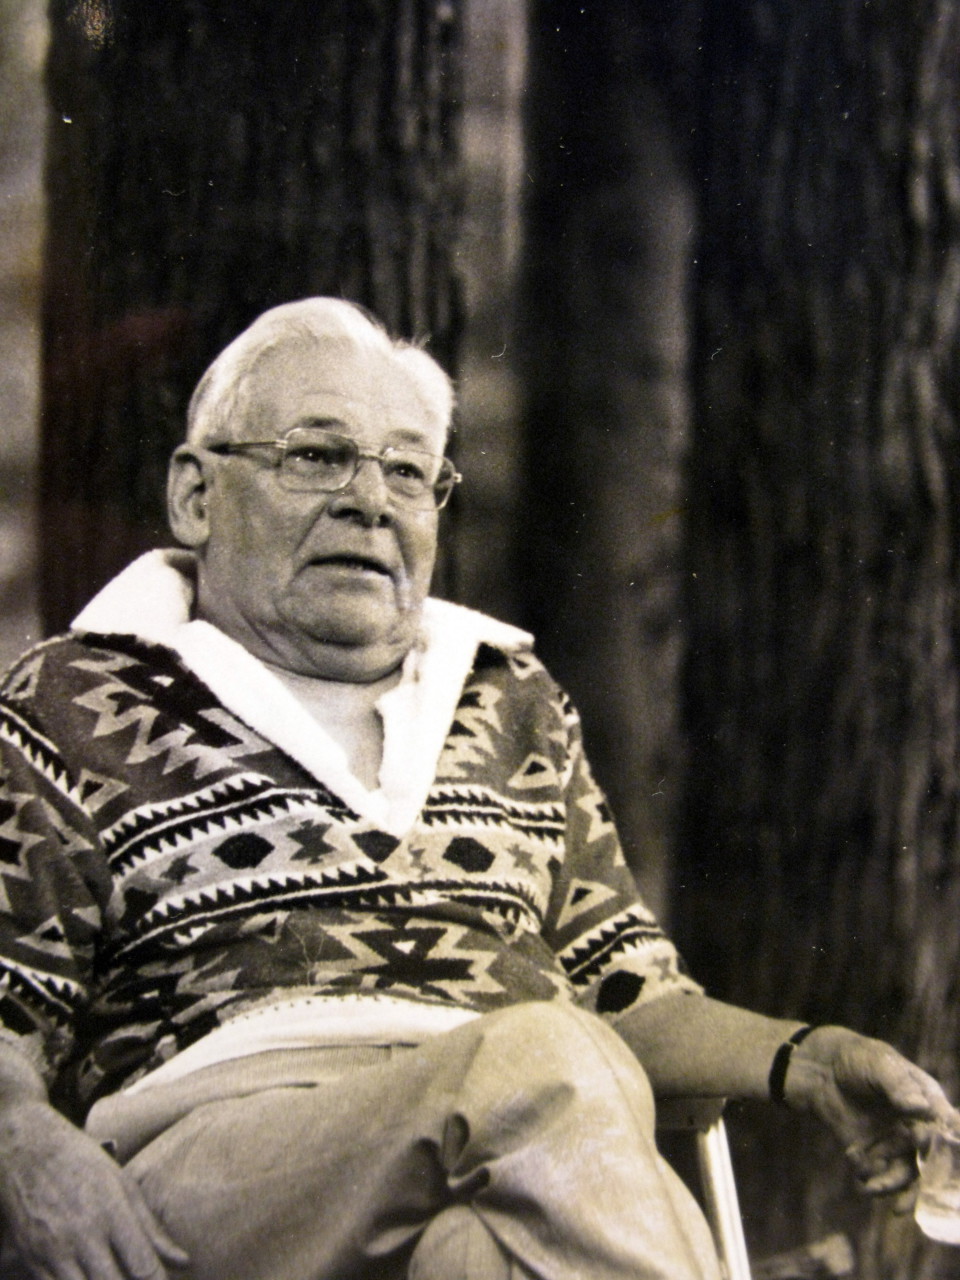 Albert L. Knox, late father of journalist Richard Knox, relaxing in New Hampshire in the mid-1980s. (Courtesy of Richard Knox)